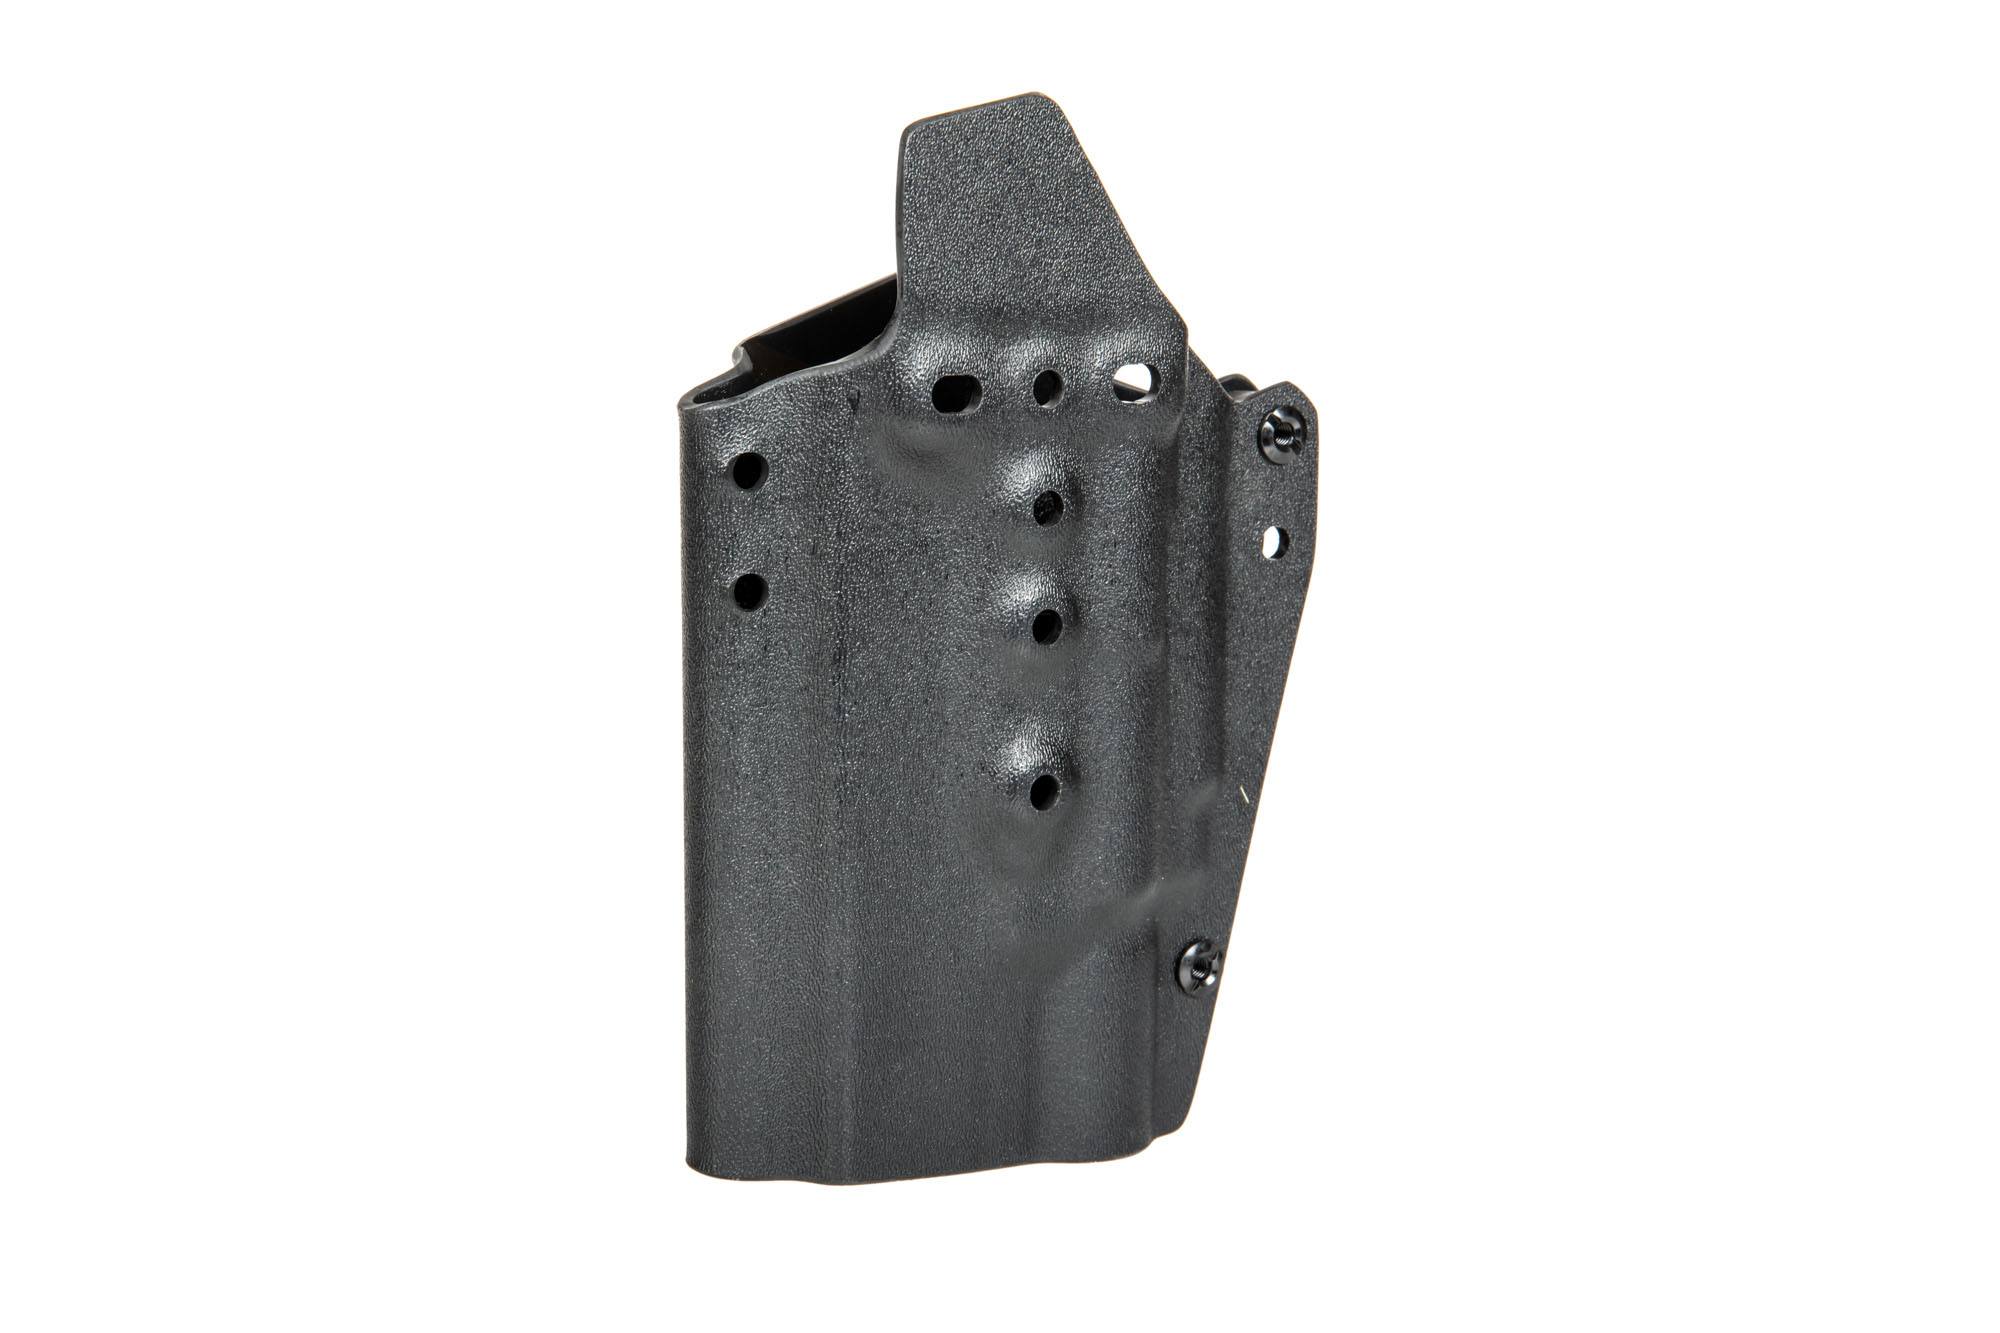 Kydex Holster for G17 replicas with X400 Flashlight - Black